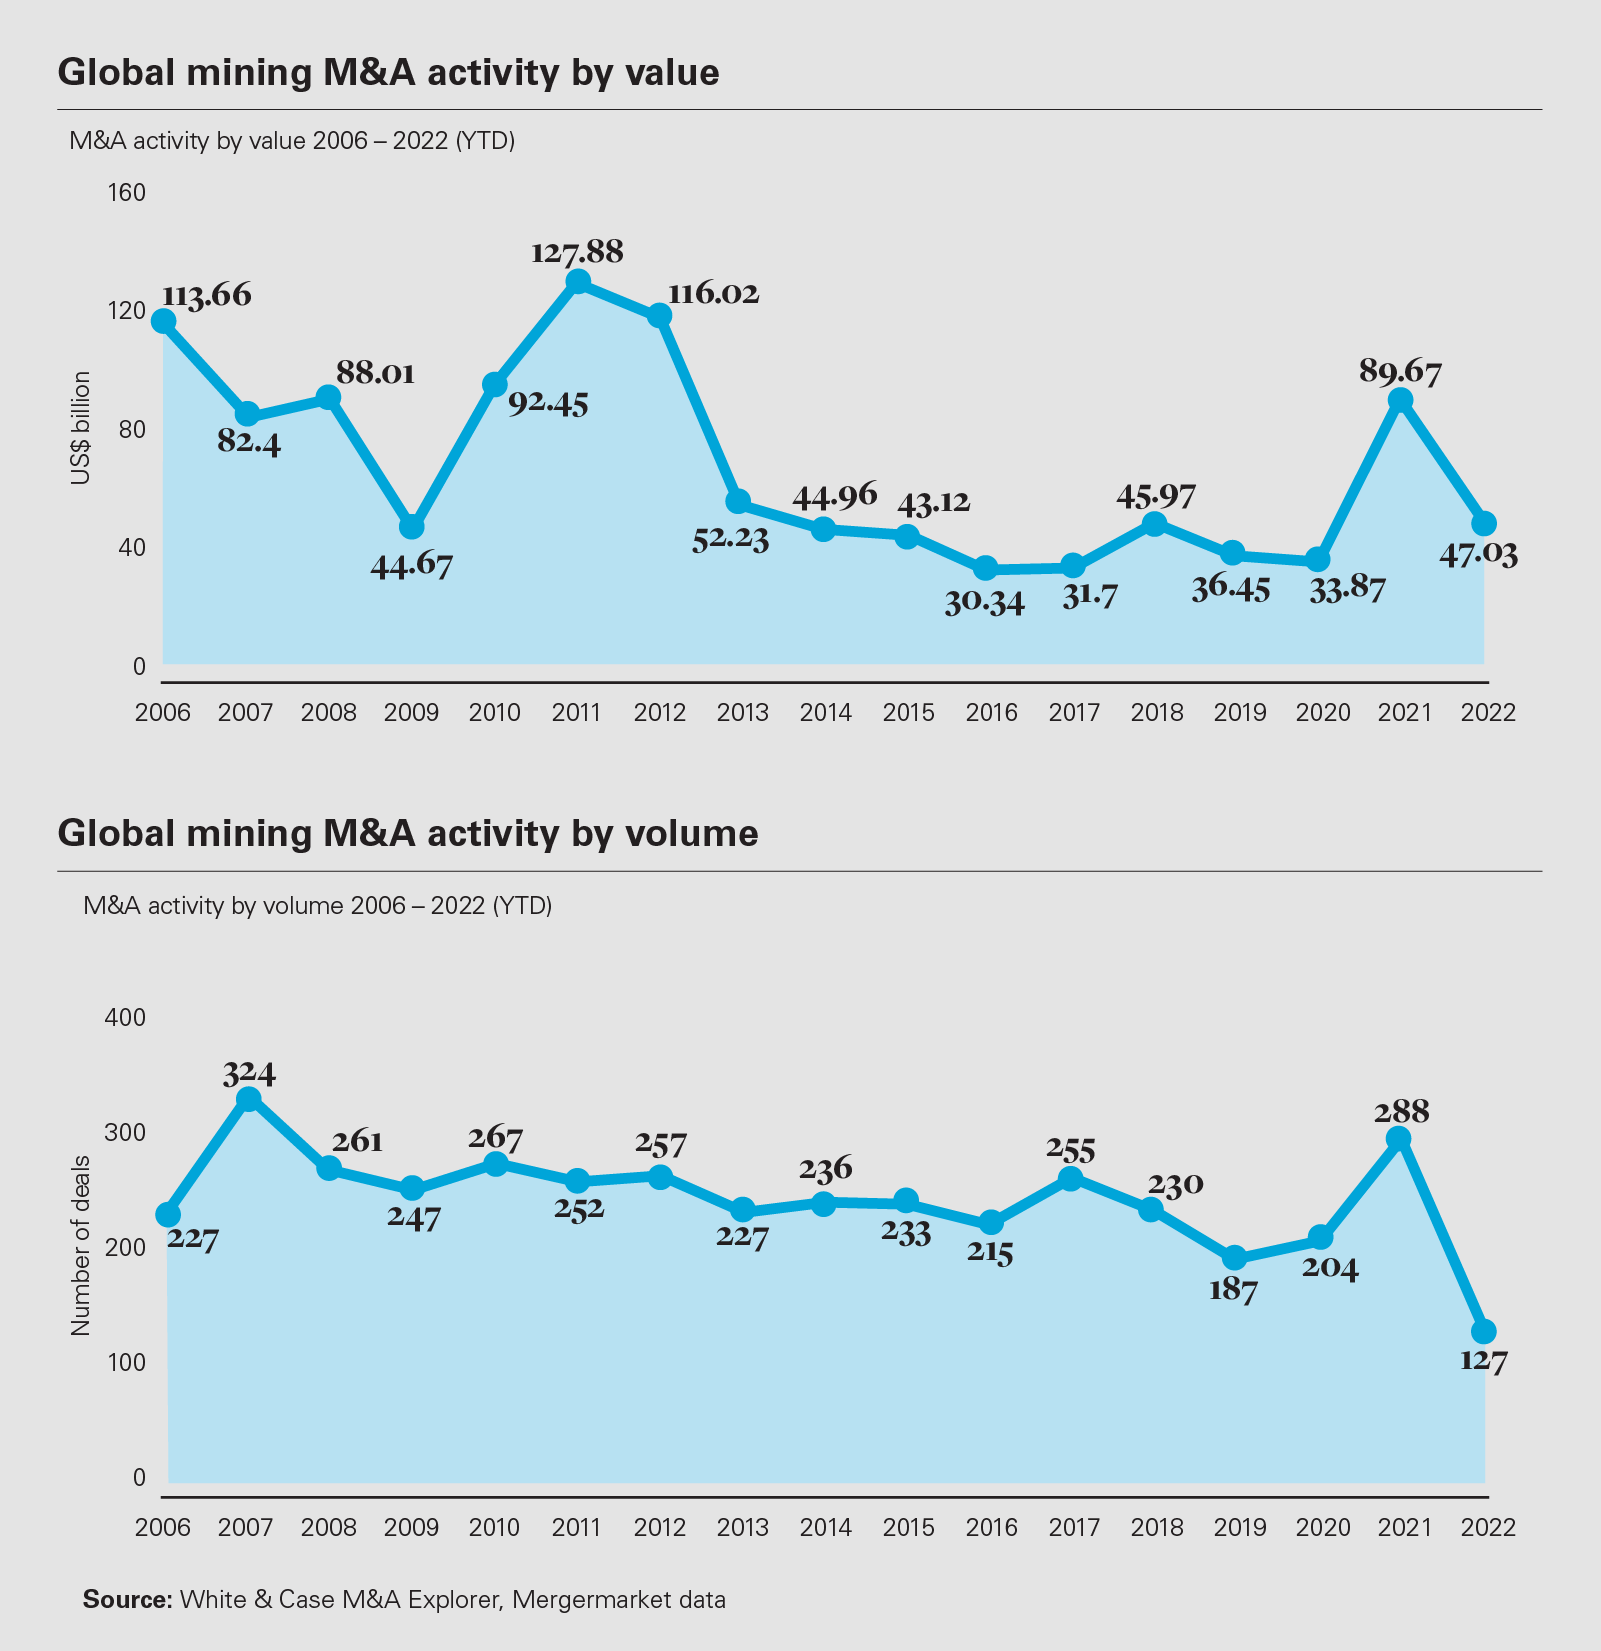 Global mining M&A activity by value